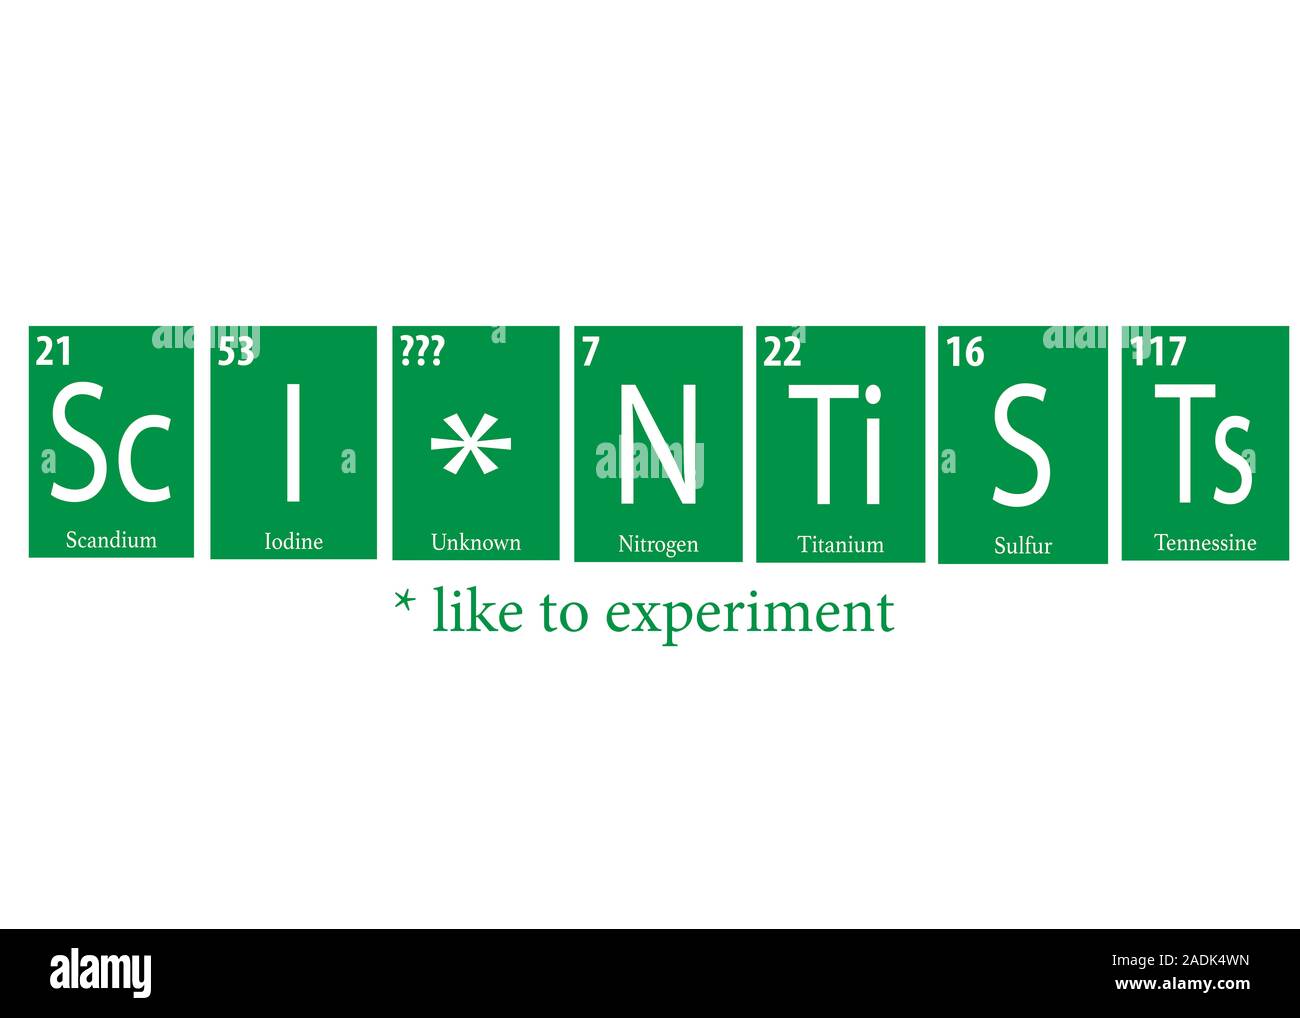 scientist-spelled-using-elements-from-the-periodic-table-with-missing